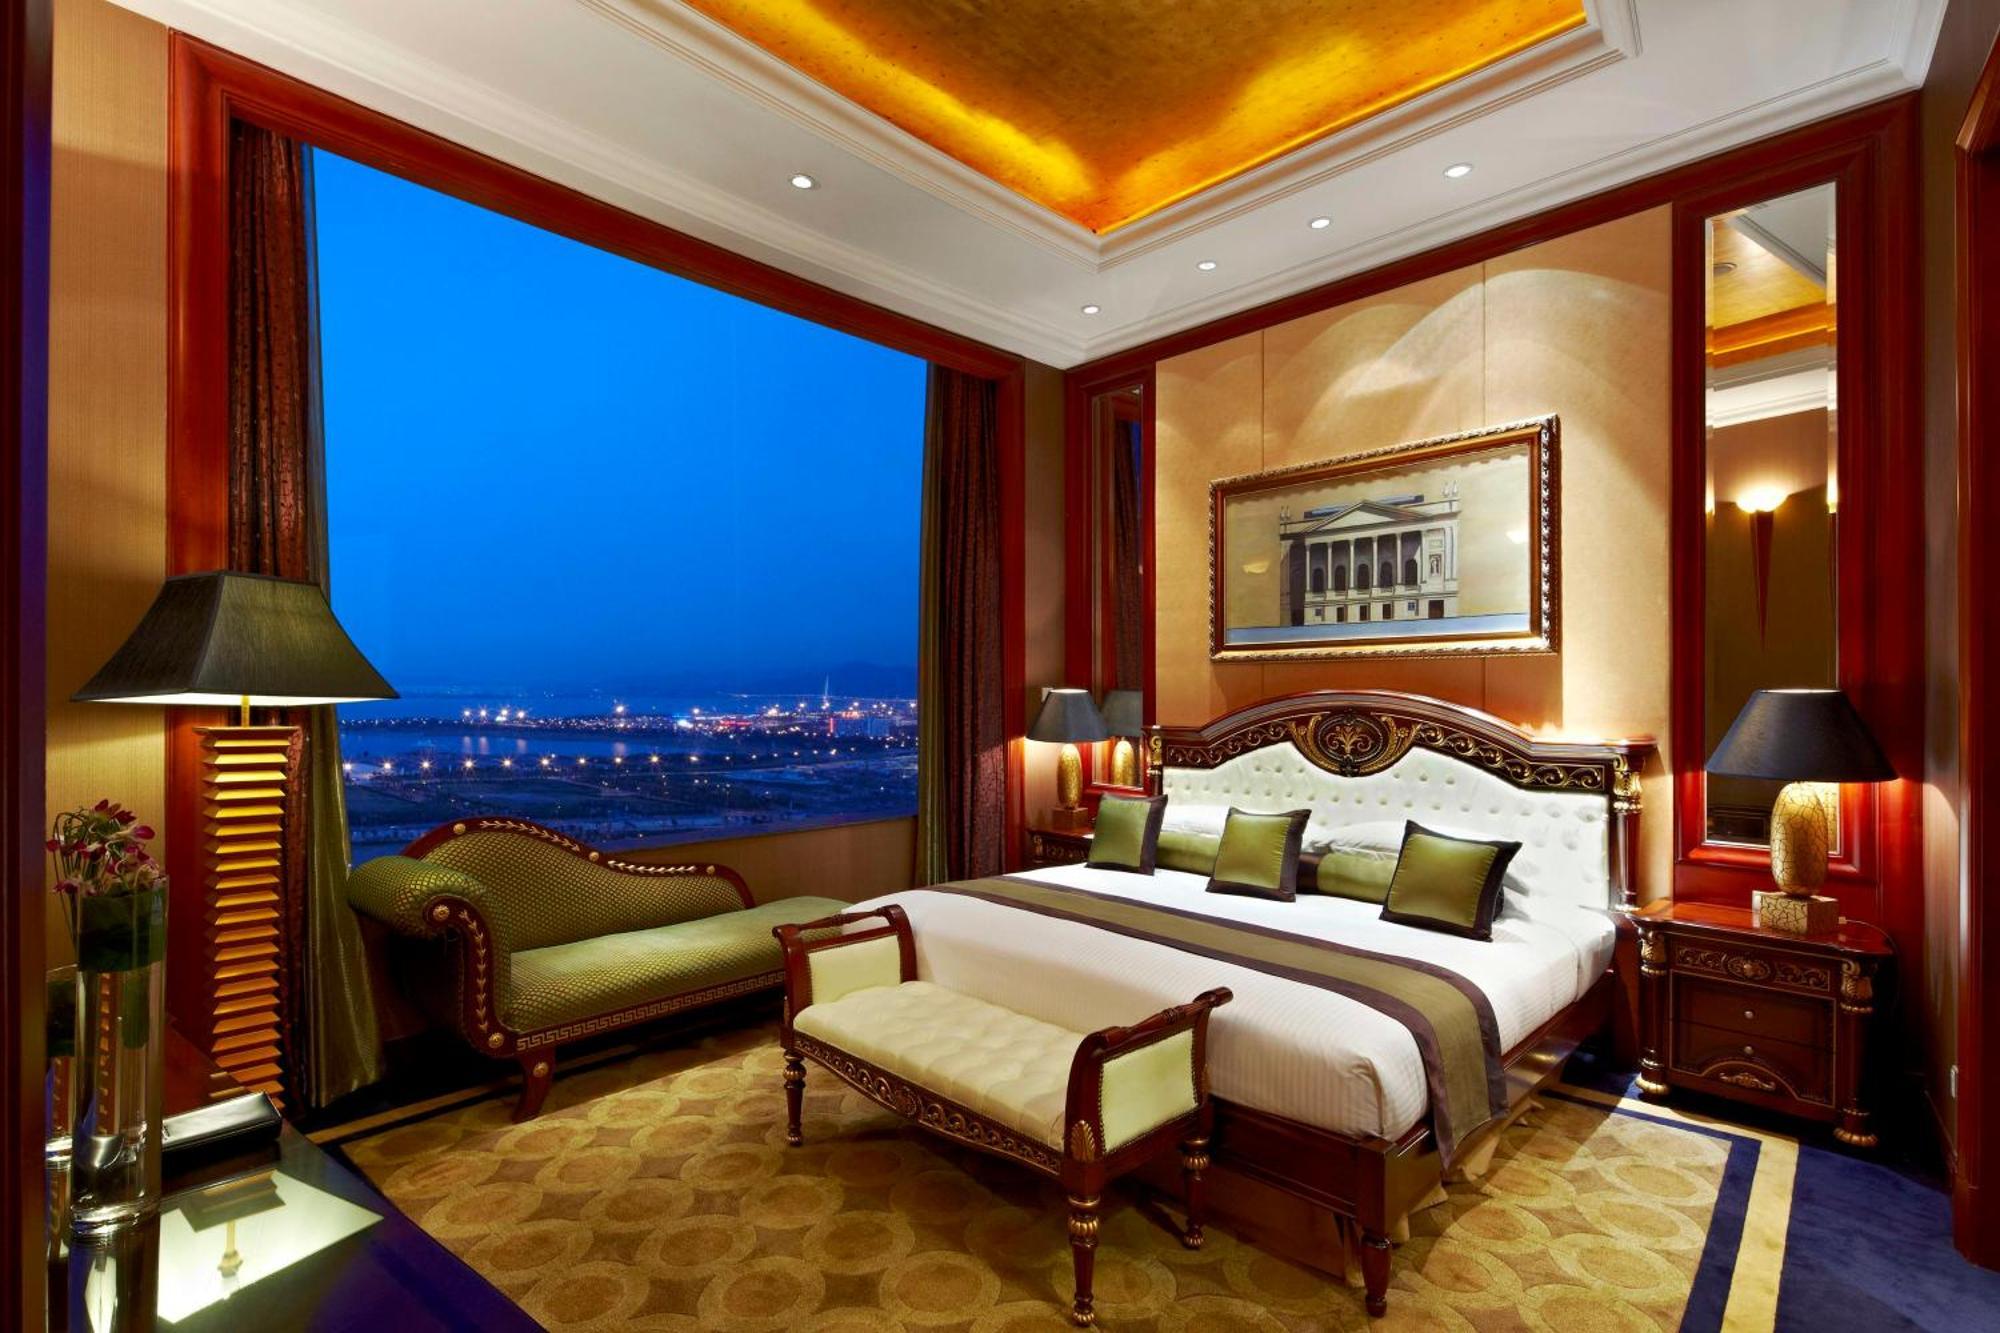 Kempinski Hotel Shenzhen - 24 Hours Stay Privilege, Subject To Hotel Inventory Екстериор снимка